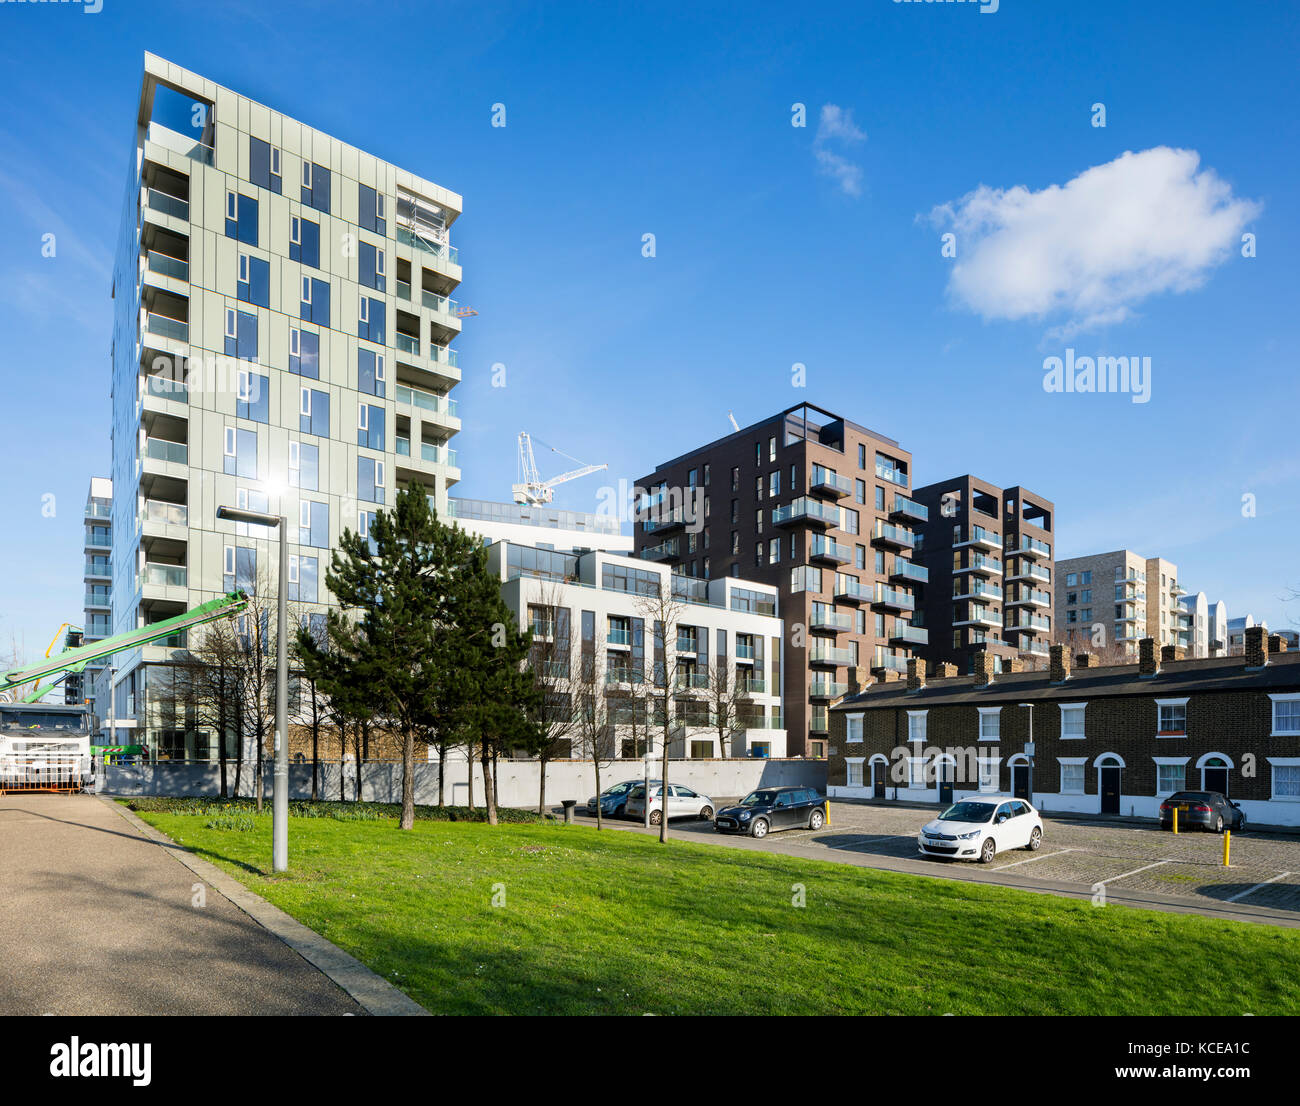 Greenwich Peninsular development and regeneration, London. The scheme will see up to 10,000 new homes, along with hotels, shops, offices and schools. Stock Photo